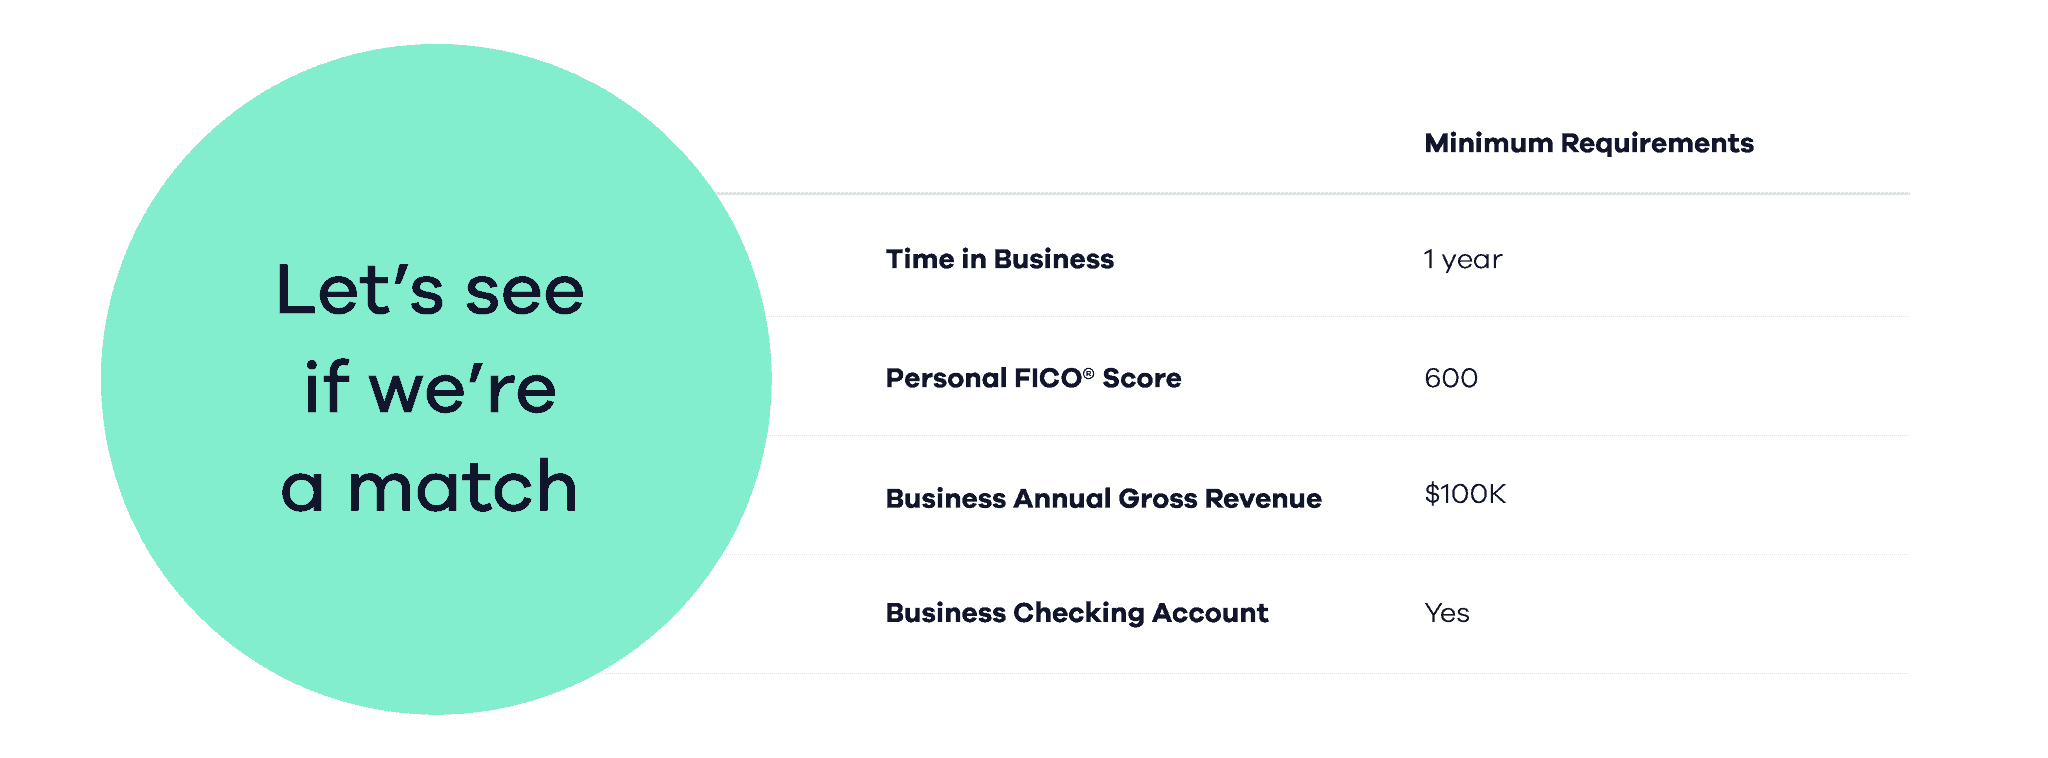 Minimum requirements: 1 year
										in business, personal FICO score of 600, business annual gross revenue
										of $100k, business checking account